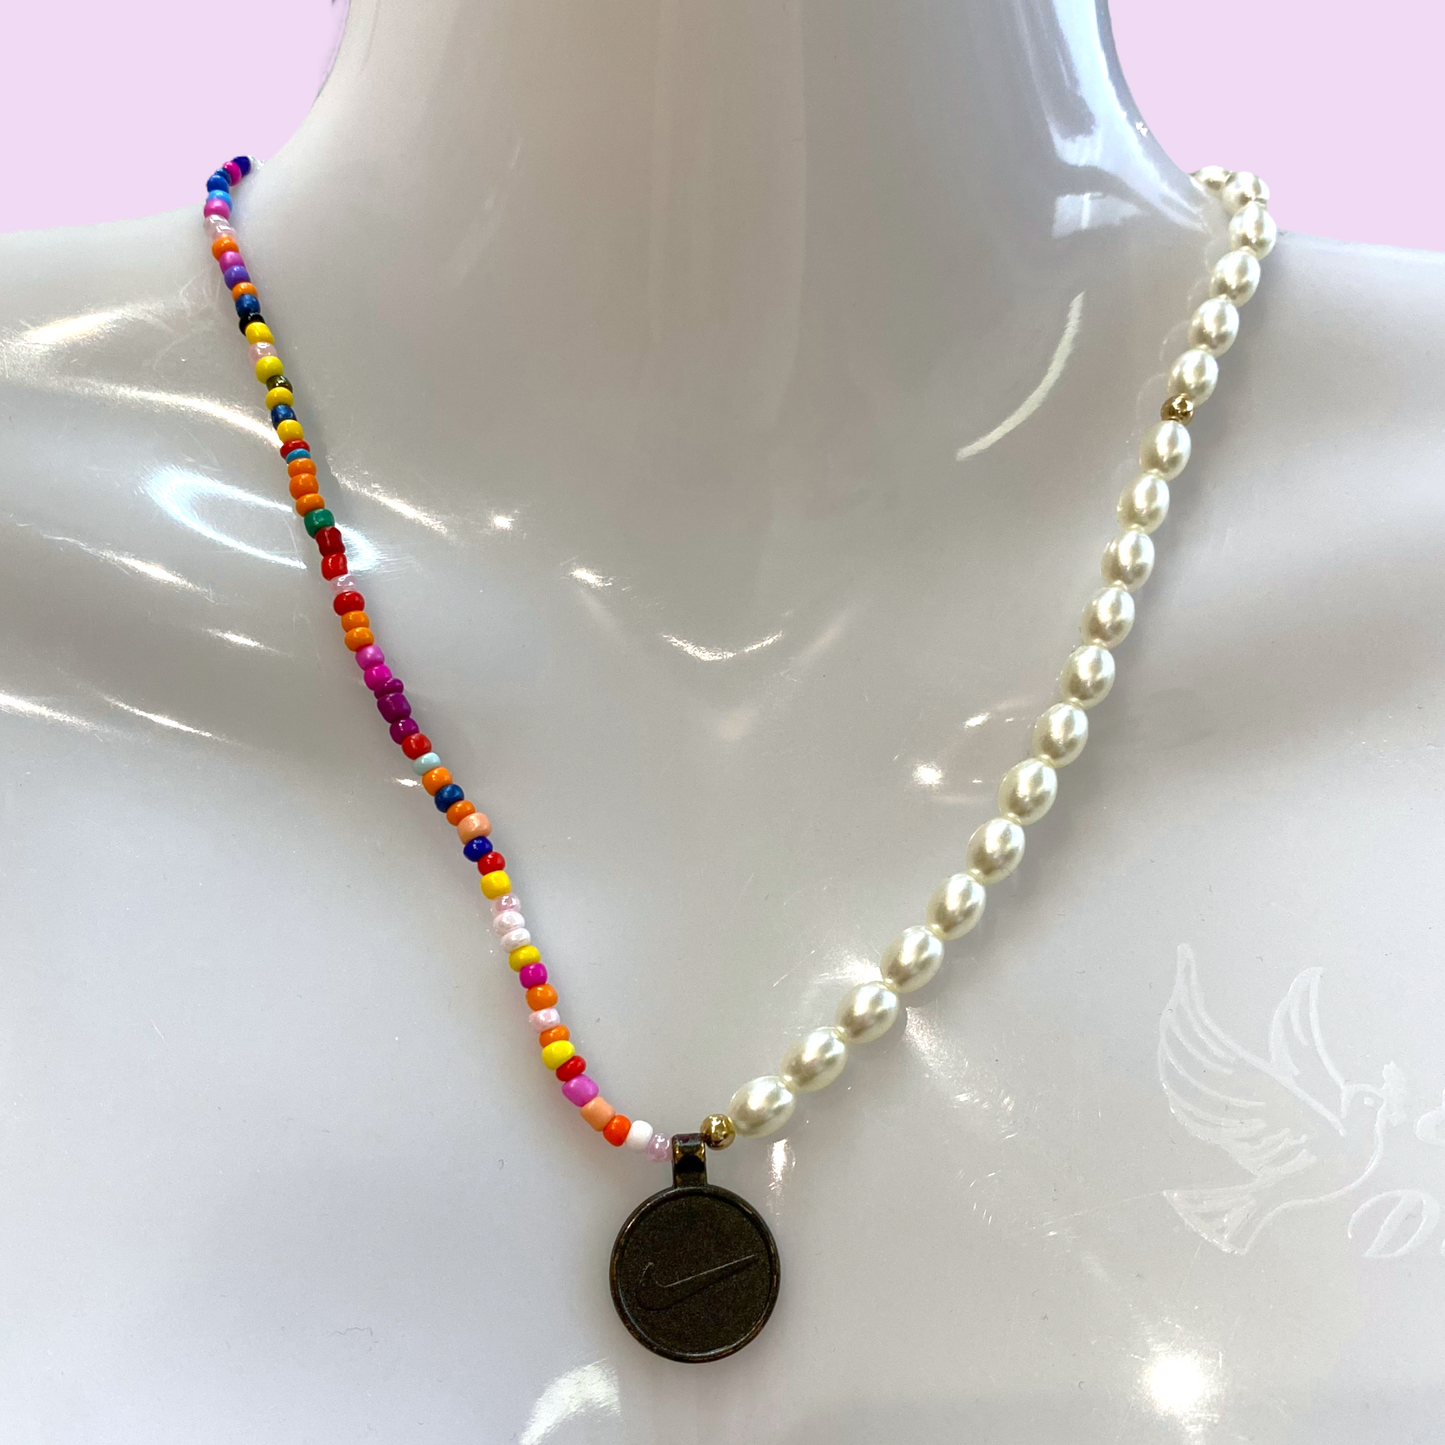 Reworked colorful beads and pearls necklace